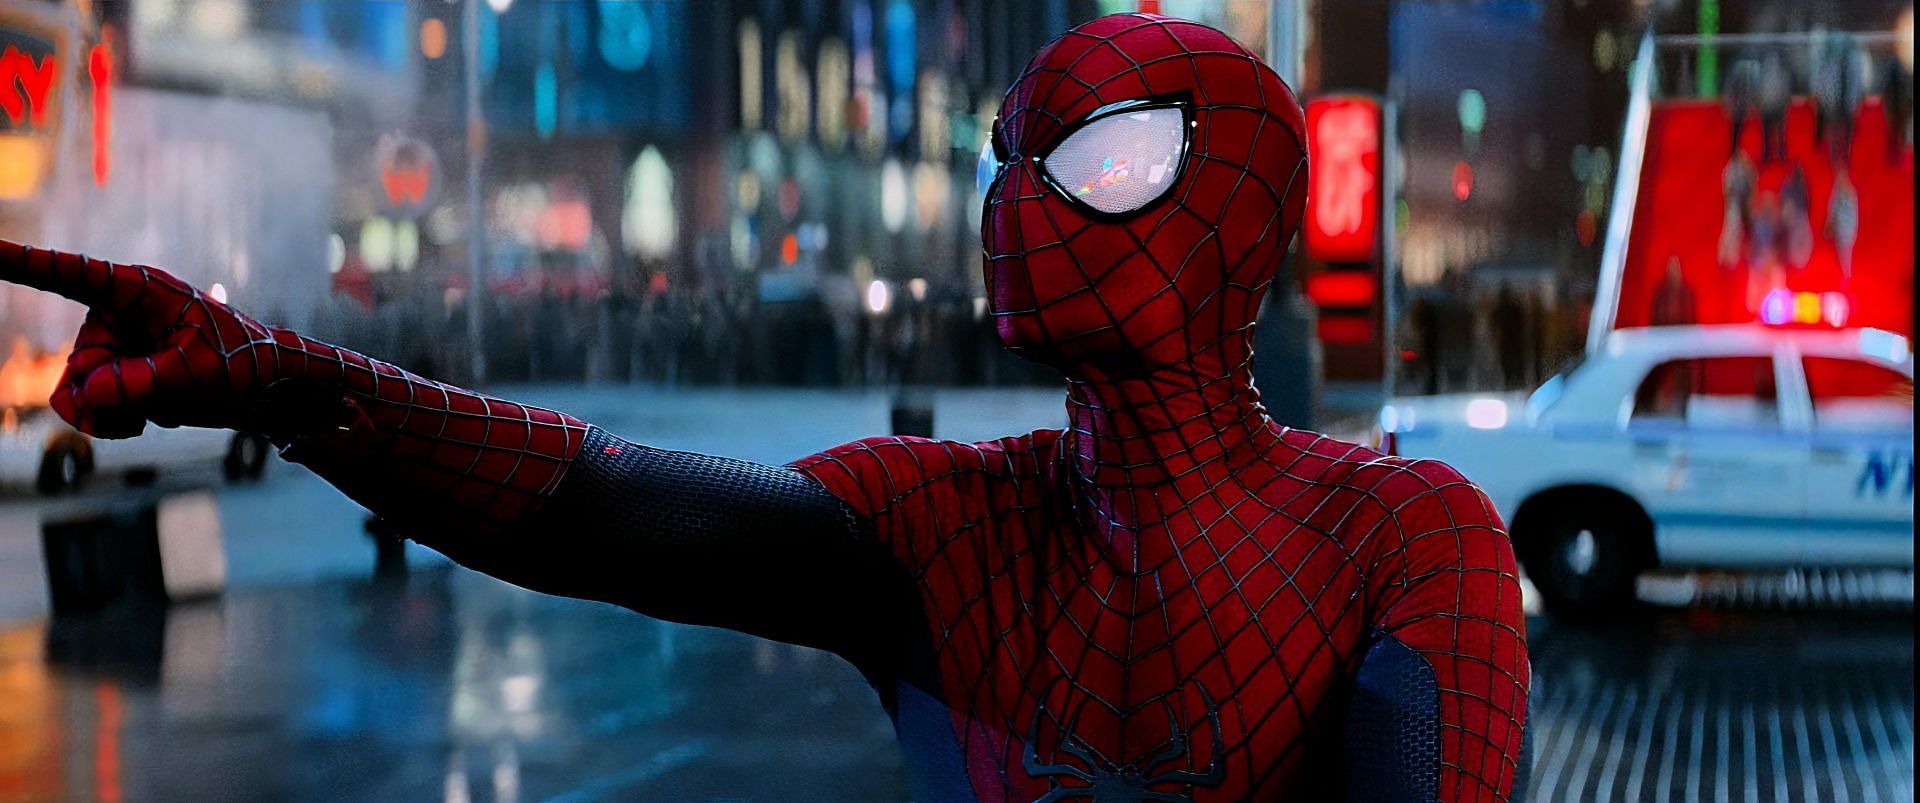 A city of diversity: Exploring New York&#039;s neighborhoods with Spider-Man (Image via Sony Pictures)